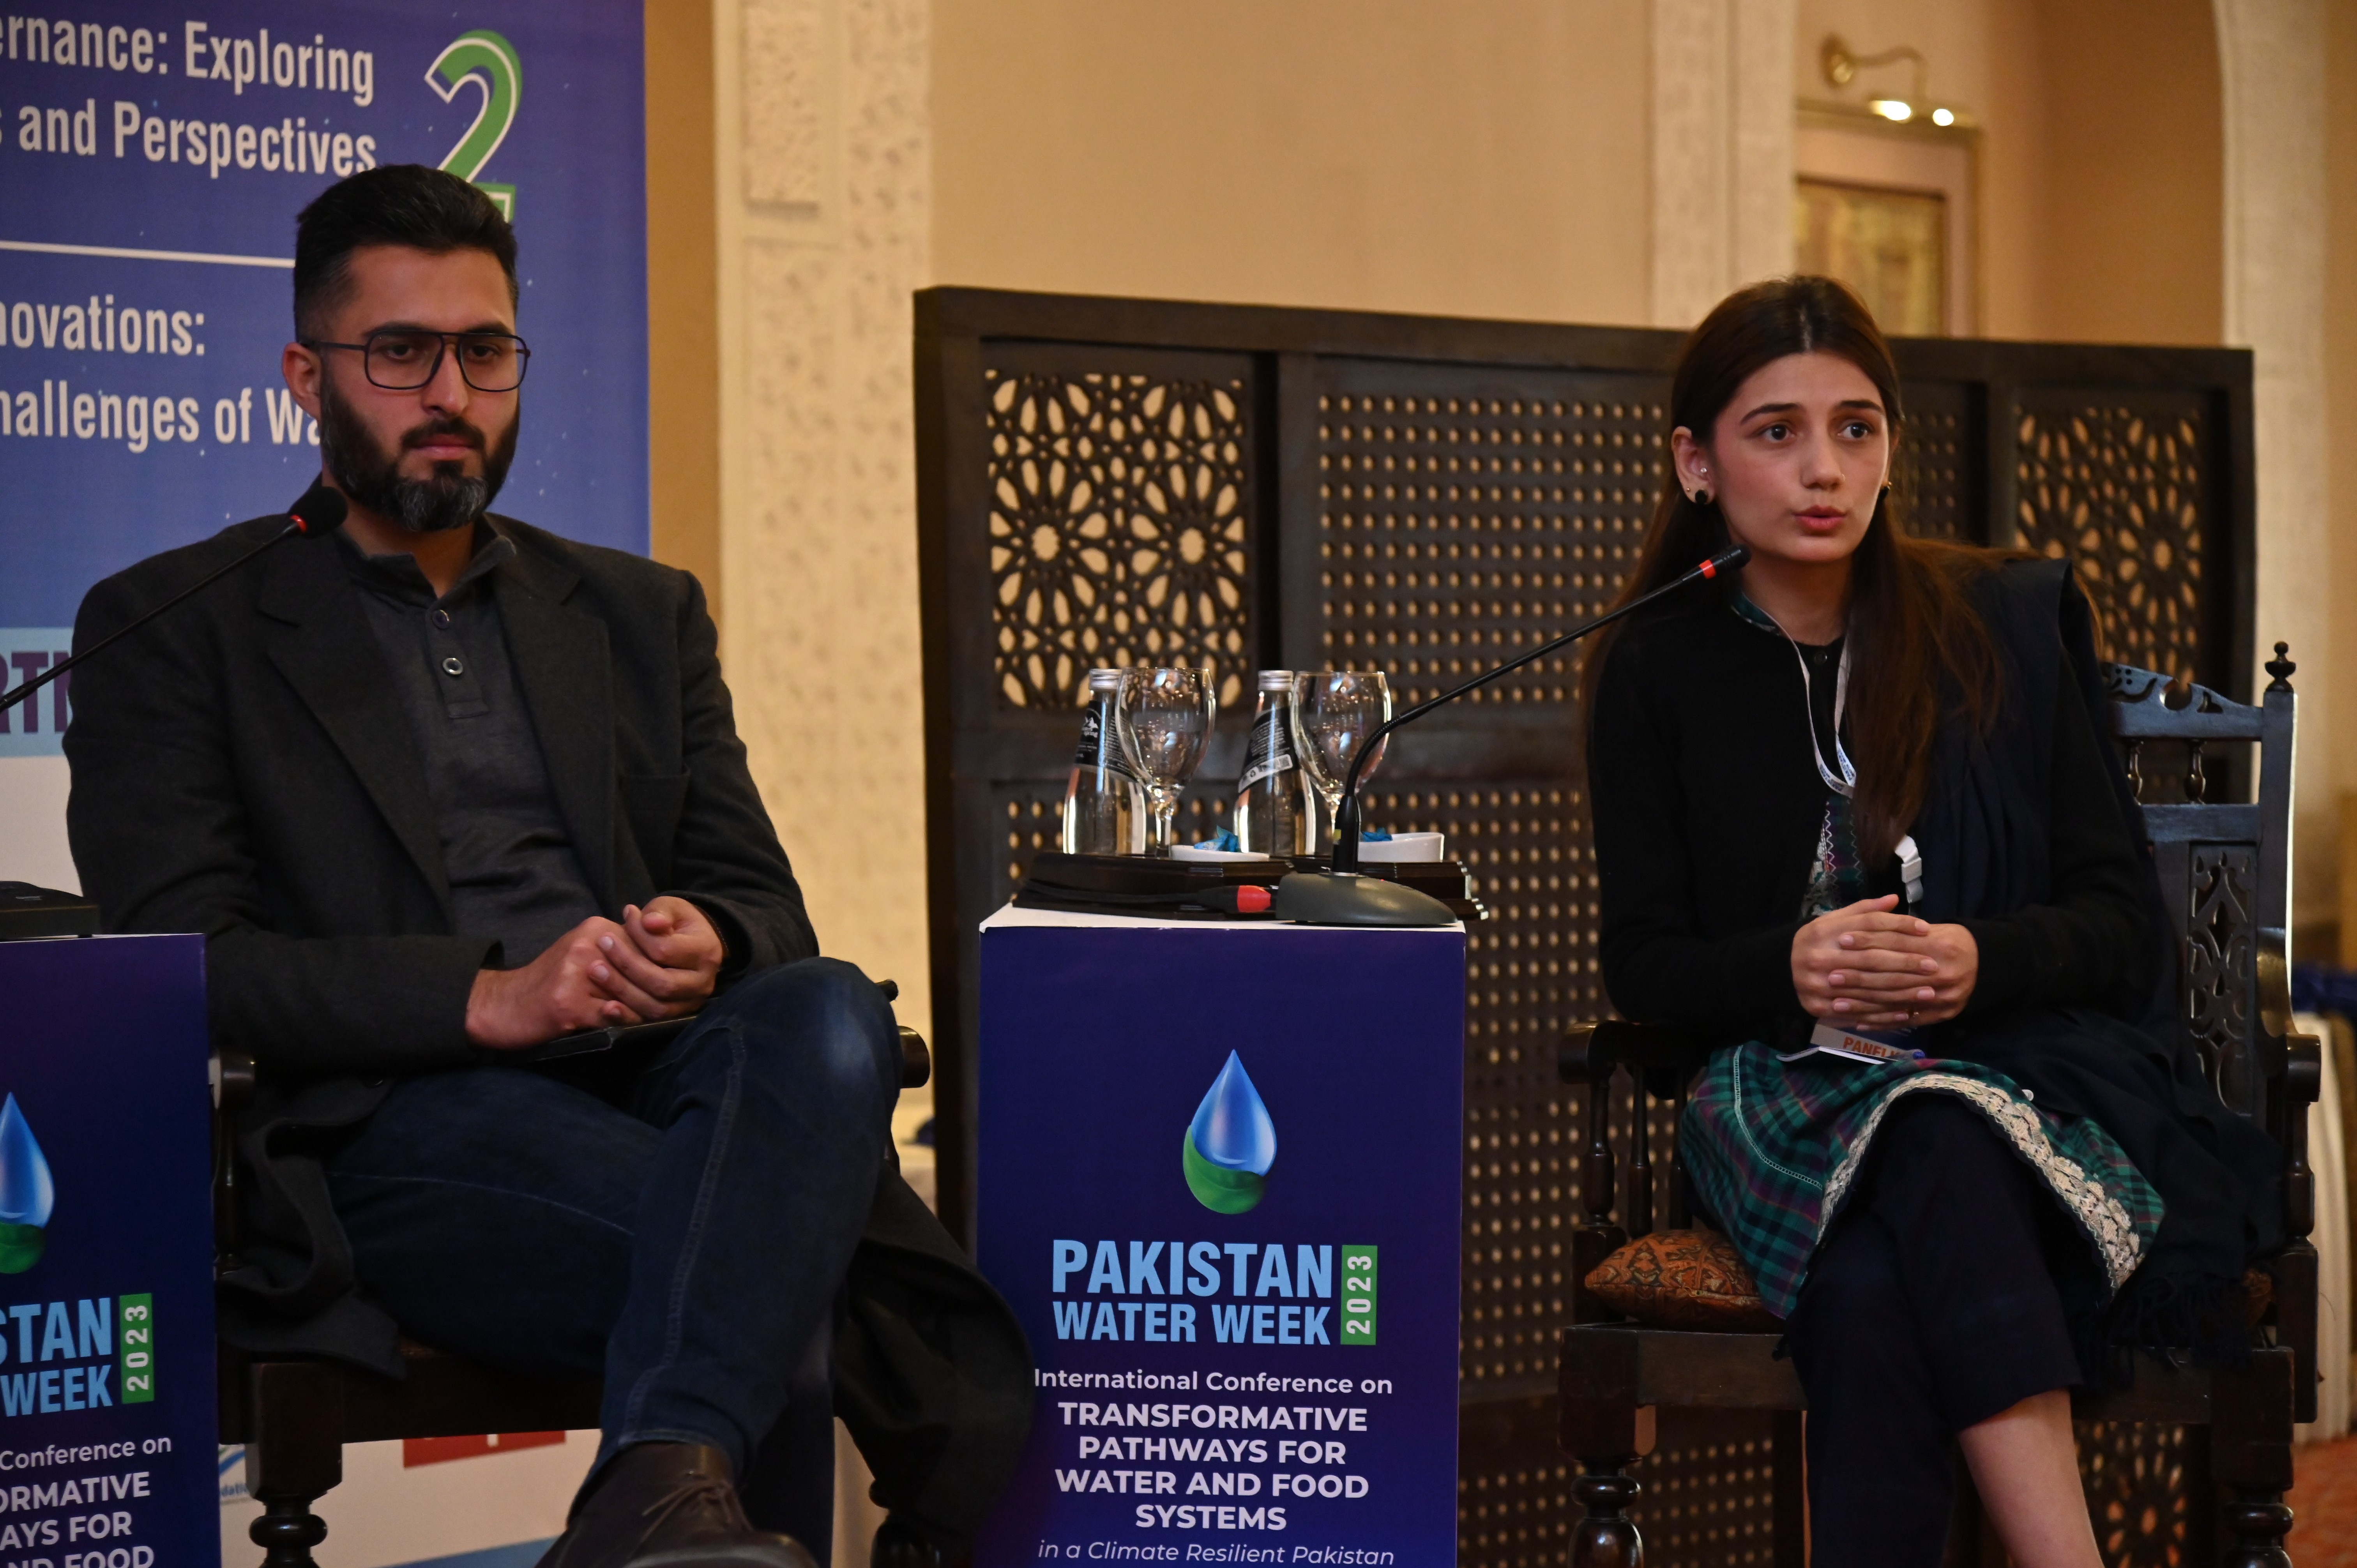 the event organizers and moderators of an International Conference & National Workshop on "PAKISTAN WATER WEEK 2023:TRANSFORMATIVE PATHWAYS FOR WATER AND FOOD SYSTEM"